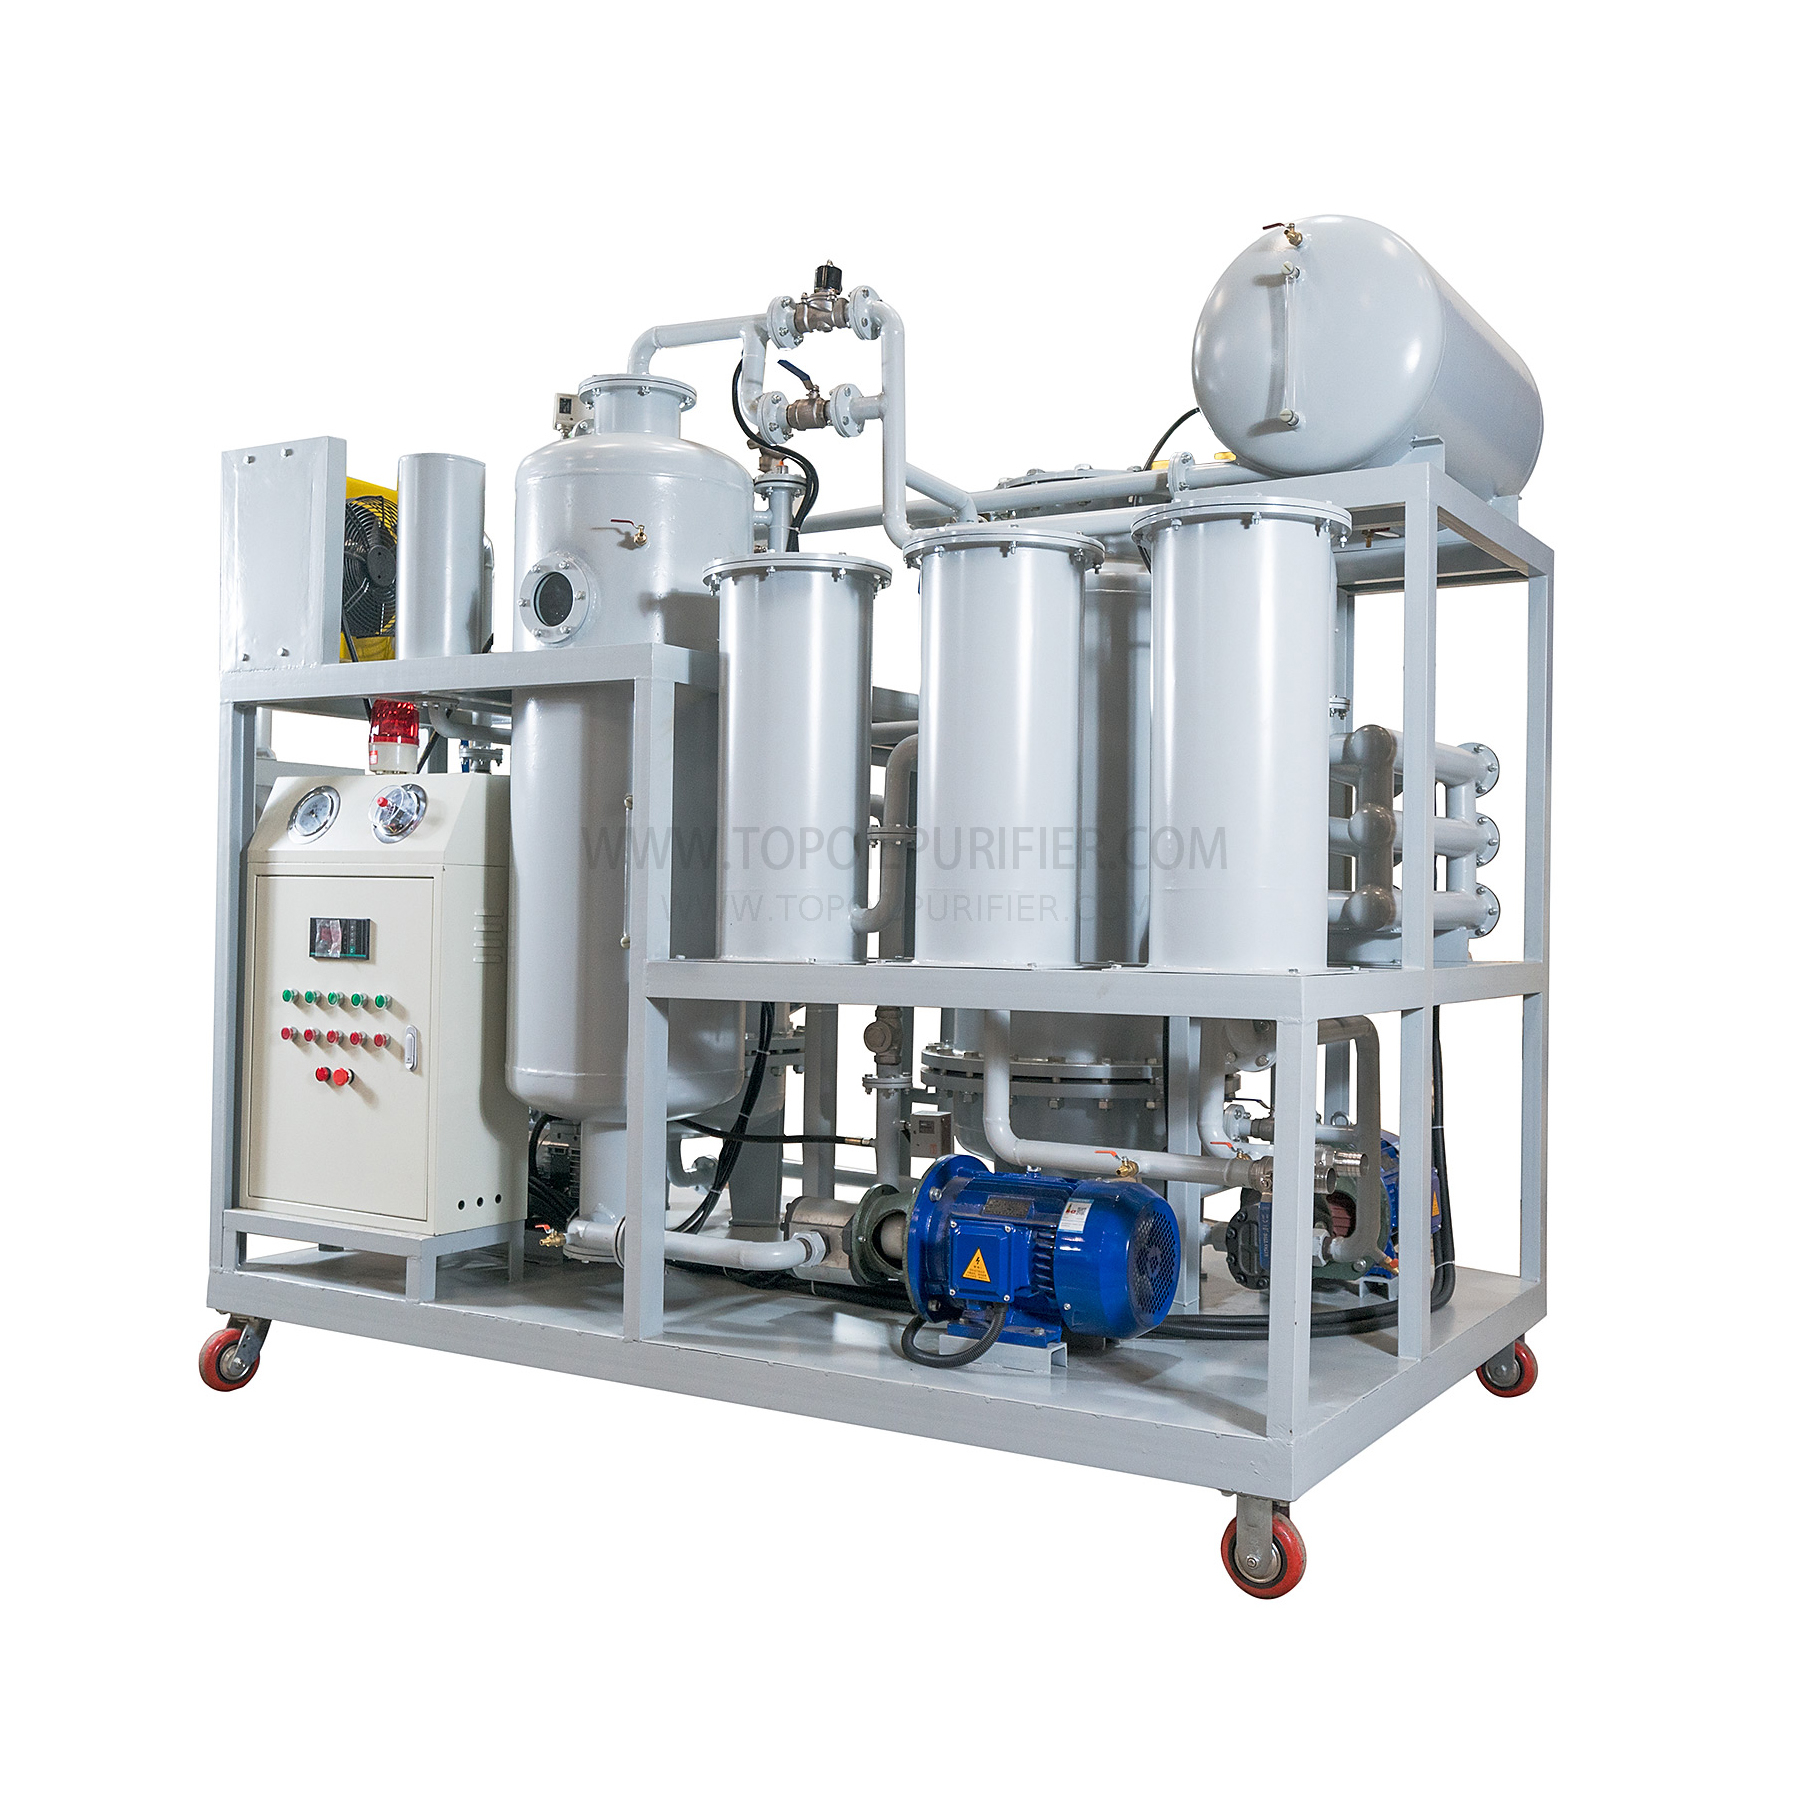 TYR Oil Purification and Decoloration Machine